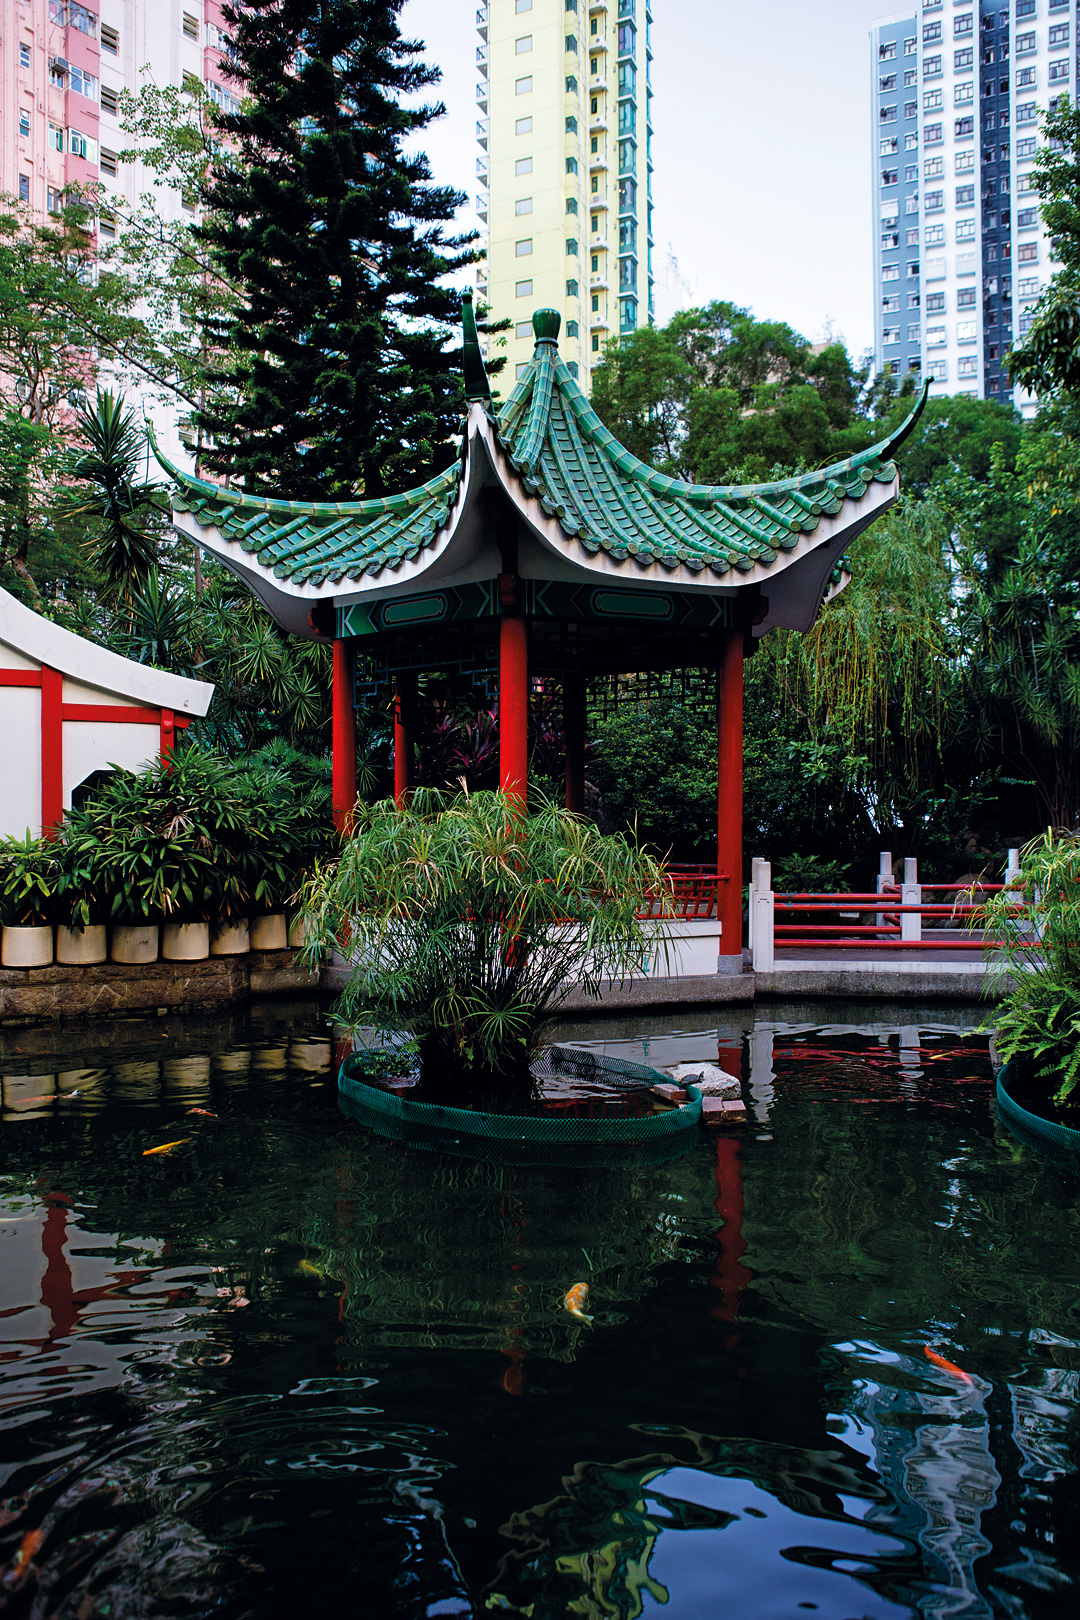 The lotus pavilion at Hollywood Road Park.